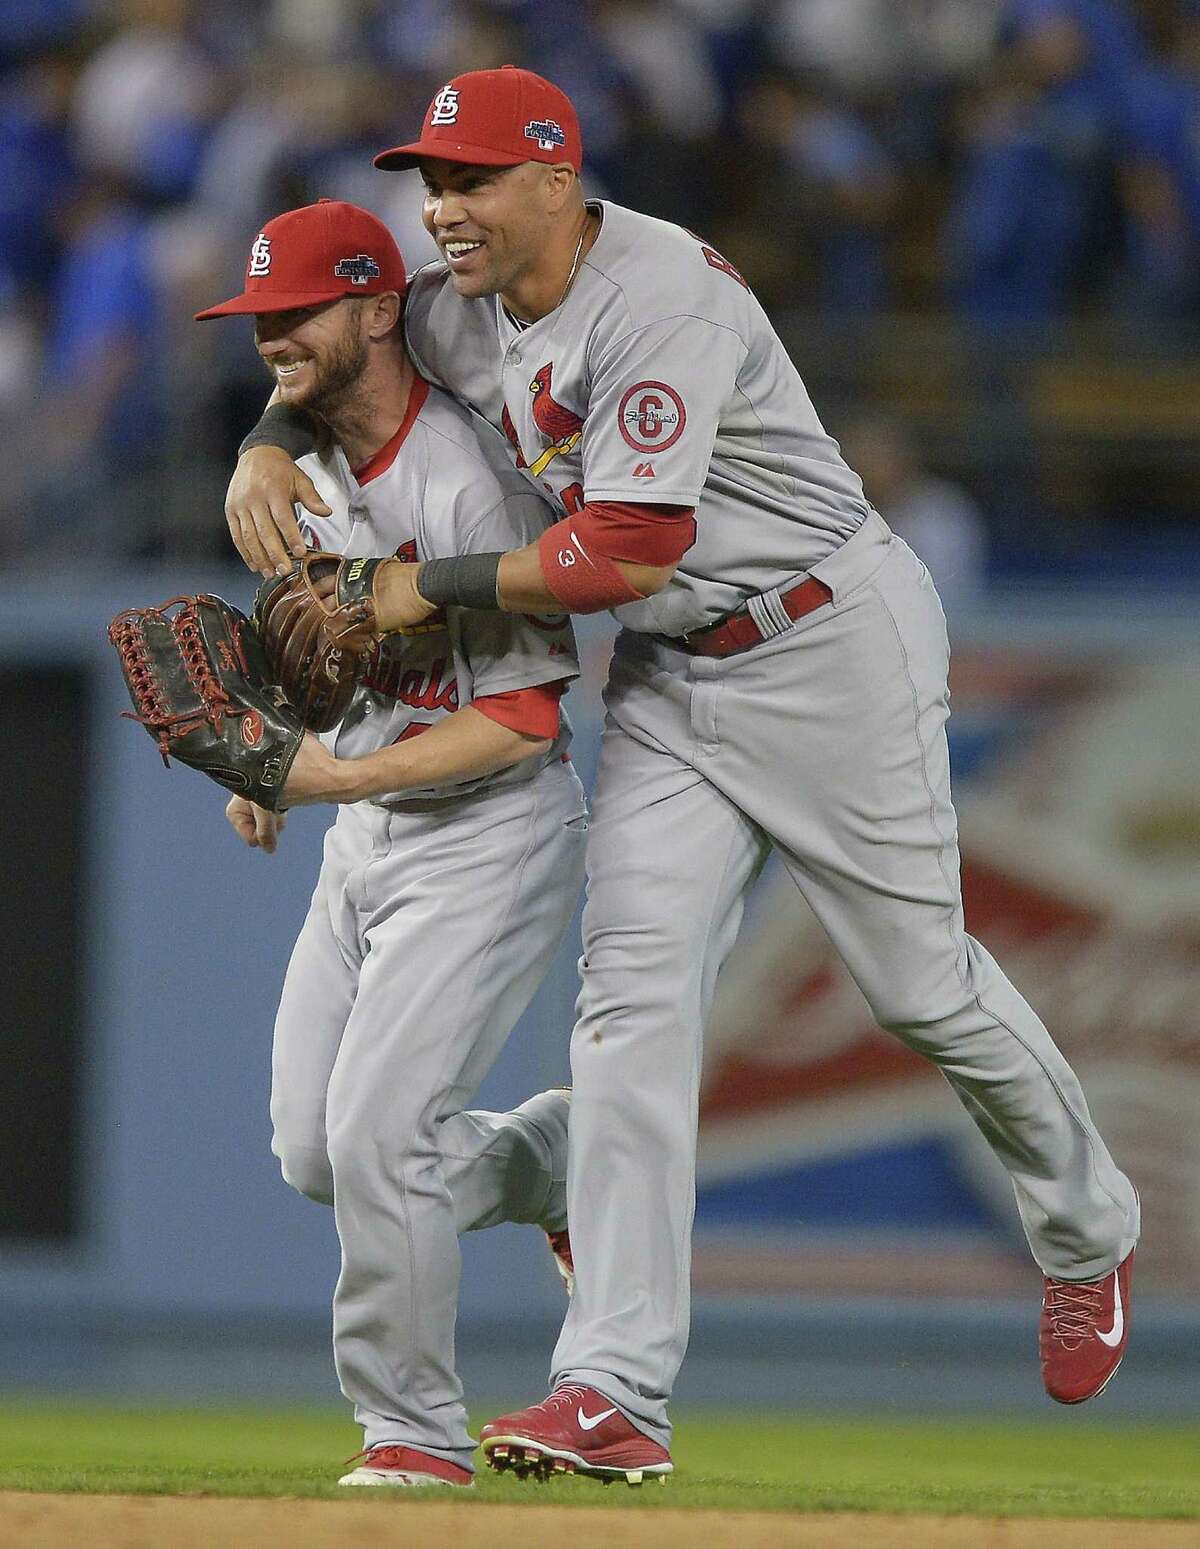 Shane Robinson (left), who had a solo home run in the seventh inning, and Carlos Beltran celebrate after the Cardinals took a 3-1 lead in the NLCS.